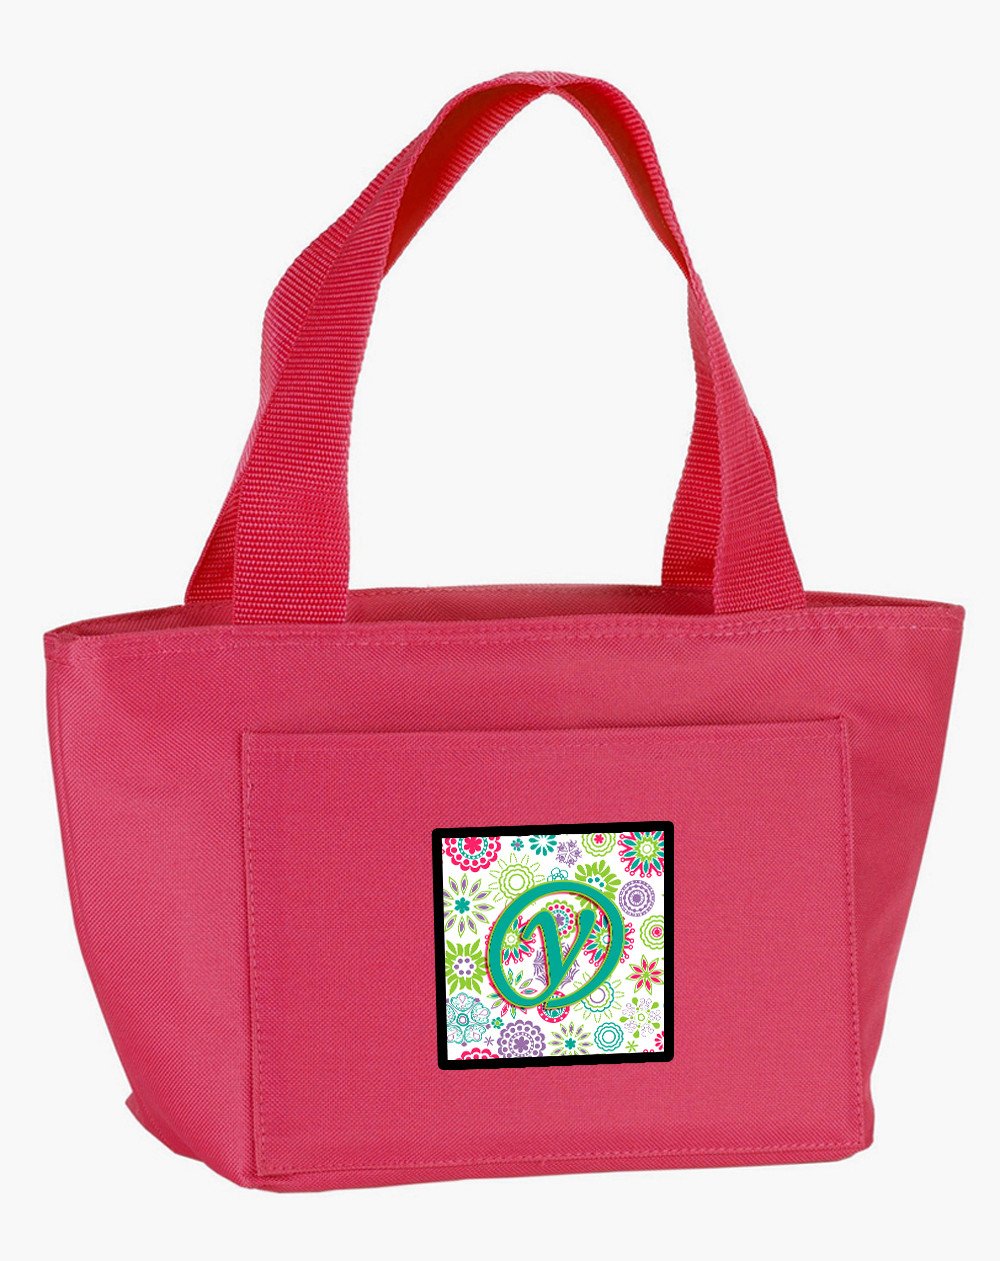 Letter Y Flowers Pink Teal Green Initial Lunch Bag CJ2011-YPK-8808 by Caroline's Treasures